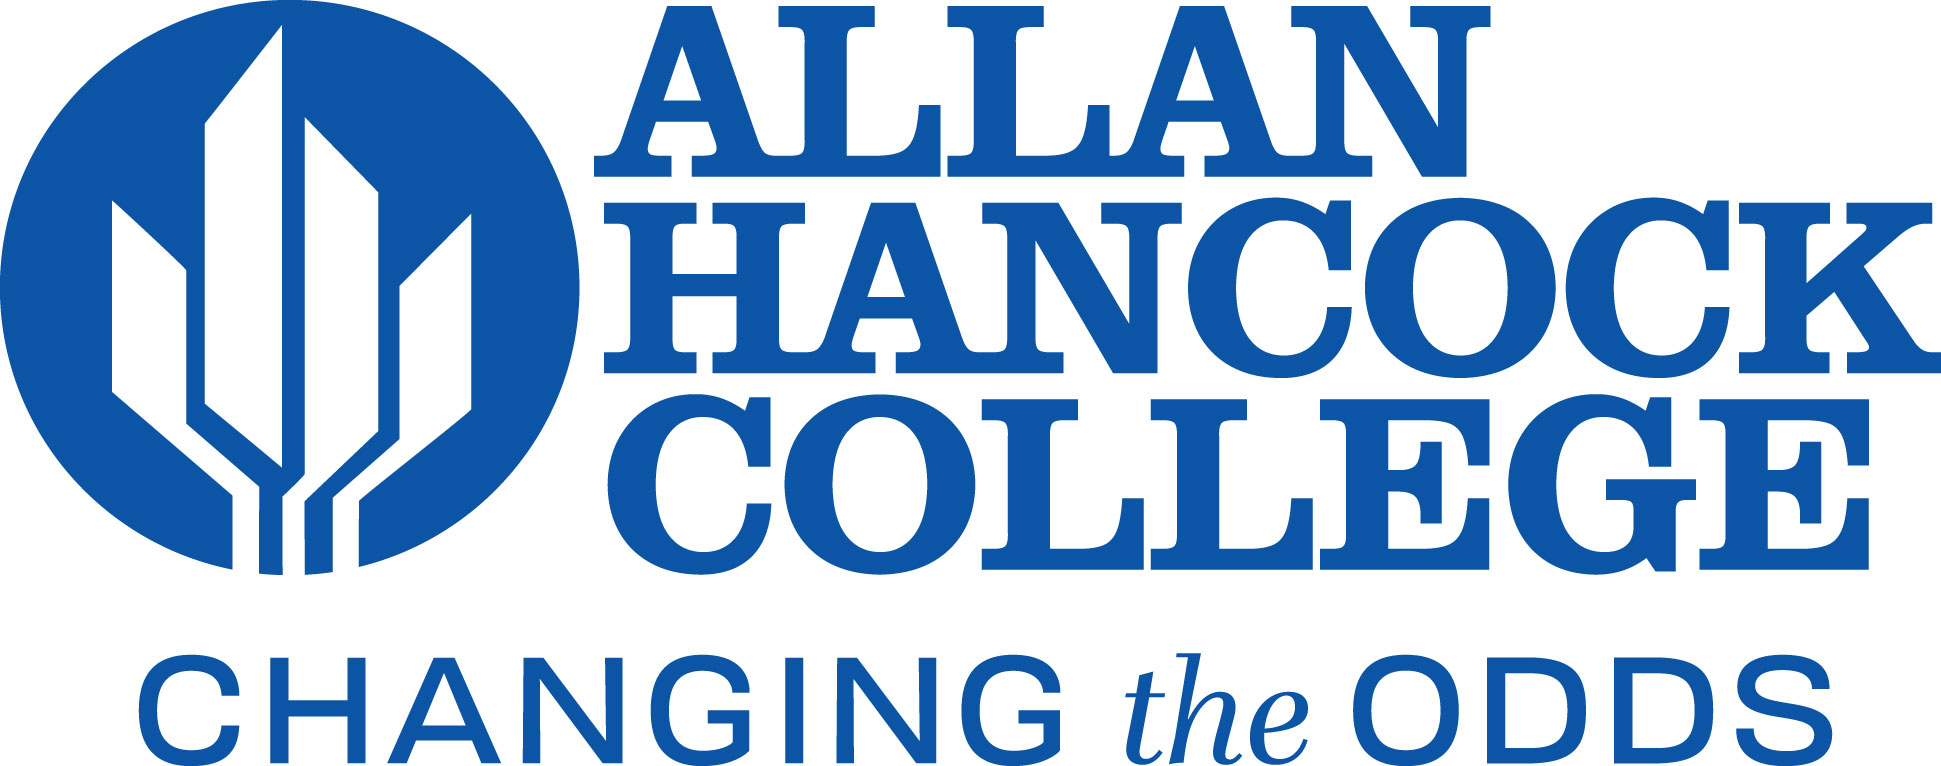 Allan Hancock College Changing the Odds - logo